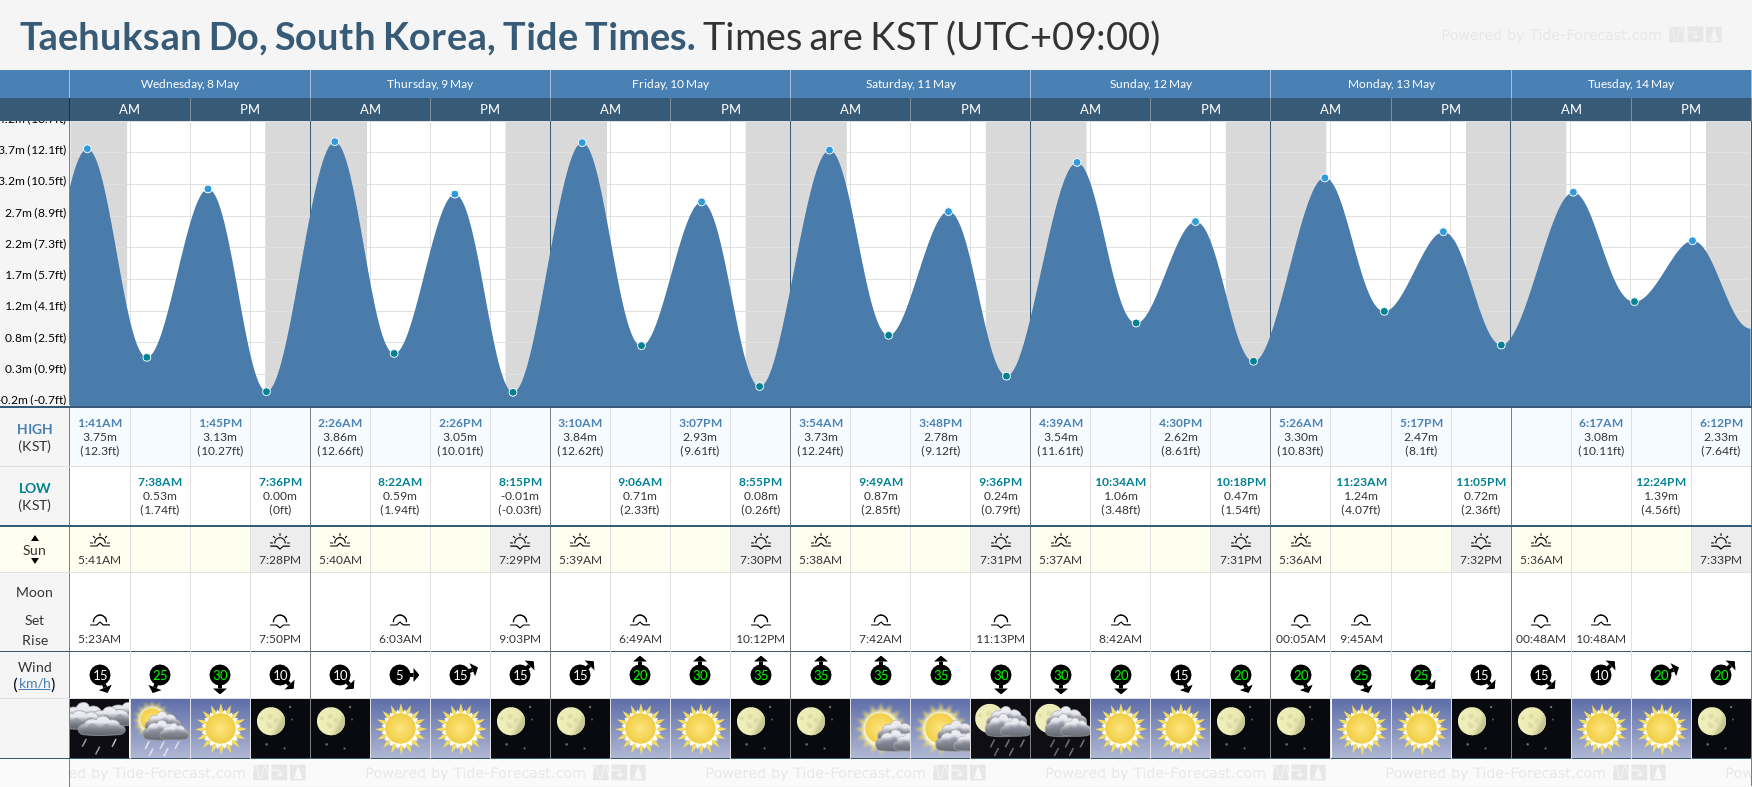 Taehuksan Do, South Korea Tide Chart including high and low tide tide times for the next 7 days